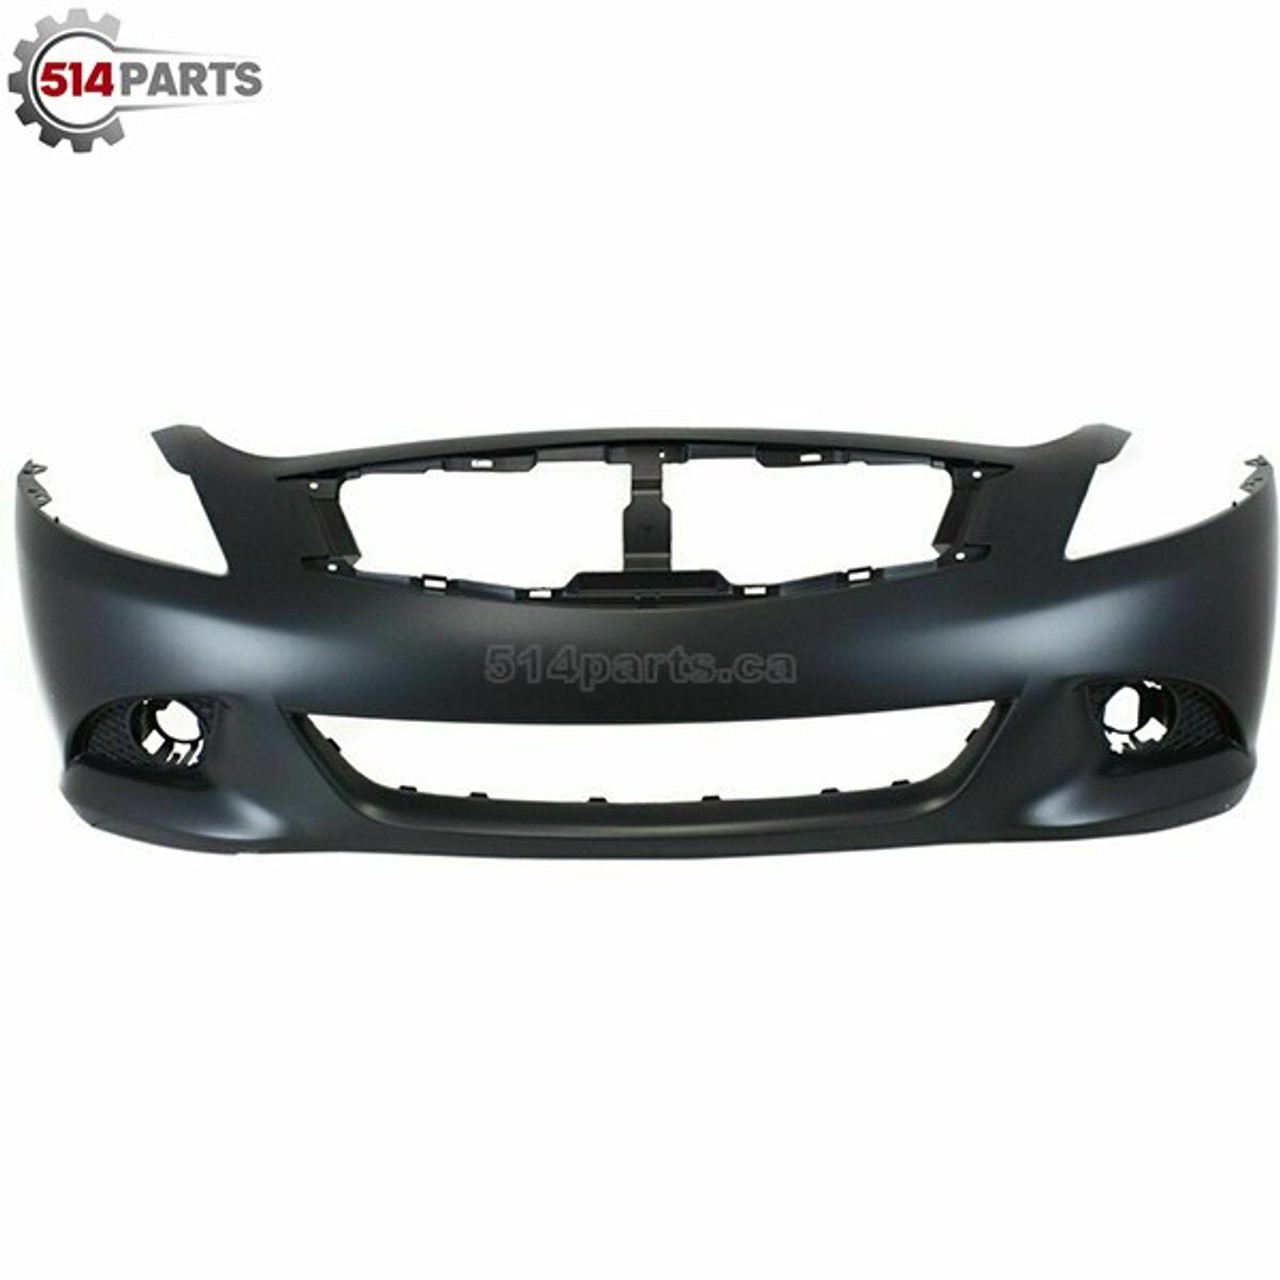 2011 - 2012 INFINITY G25 SEDAN BASE and JOURNEY MODELS FRONT BUMPER COVER - PARE-CHOCS AVANT